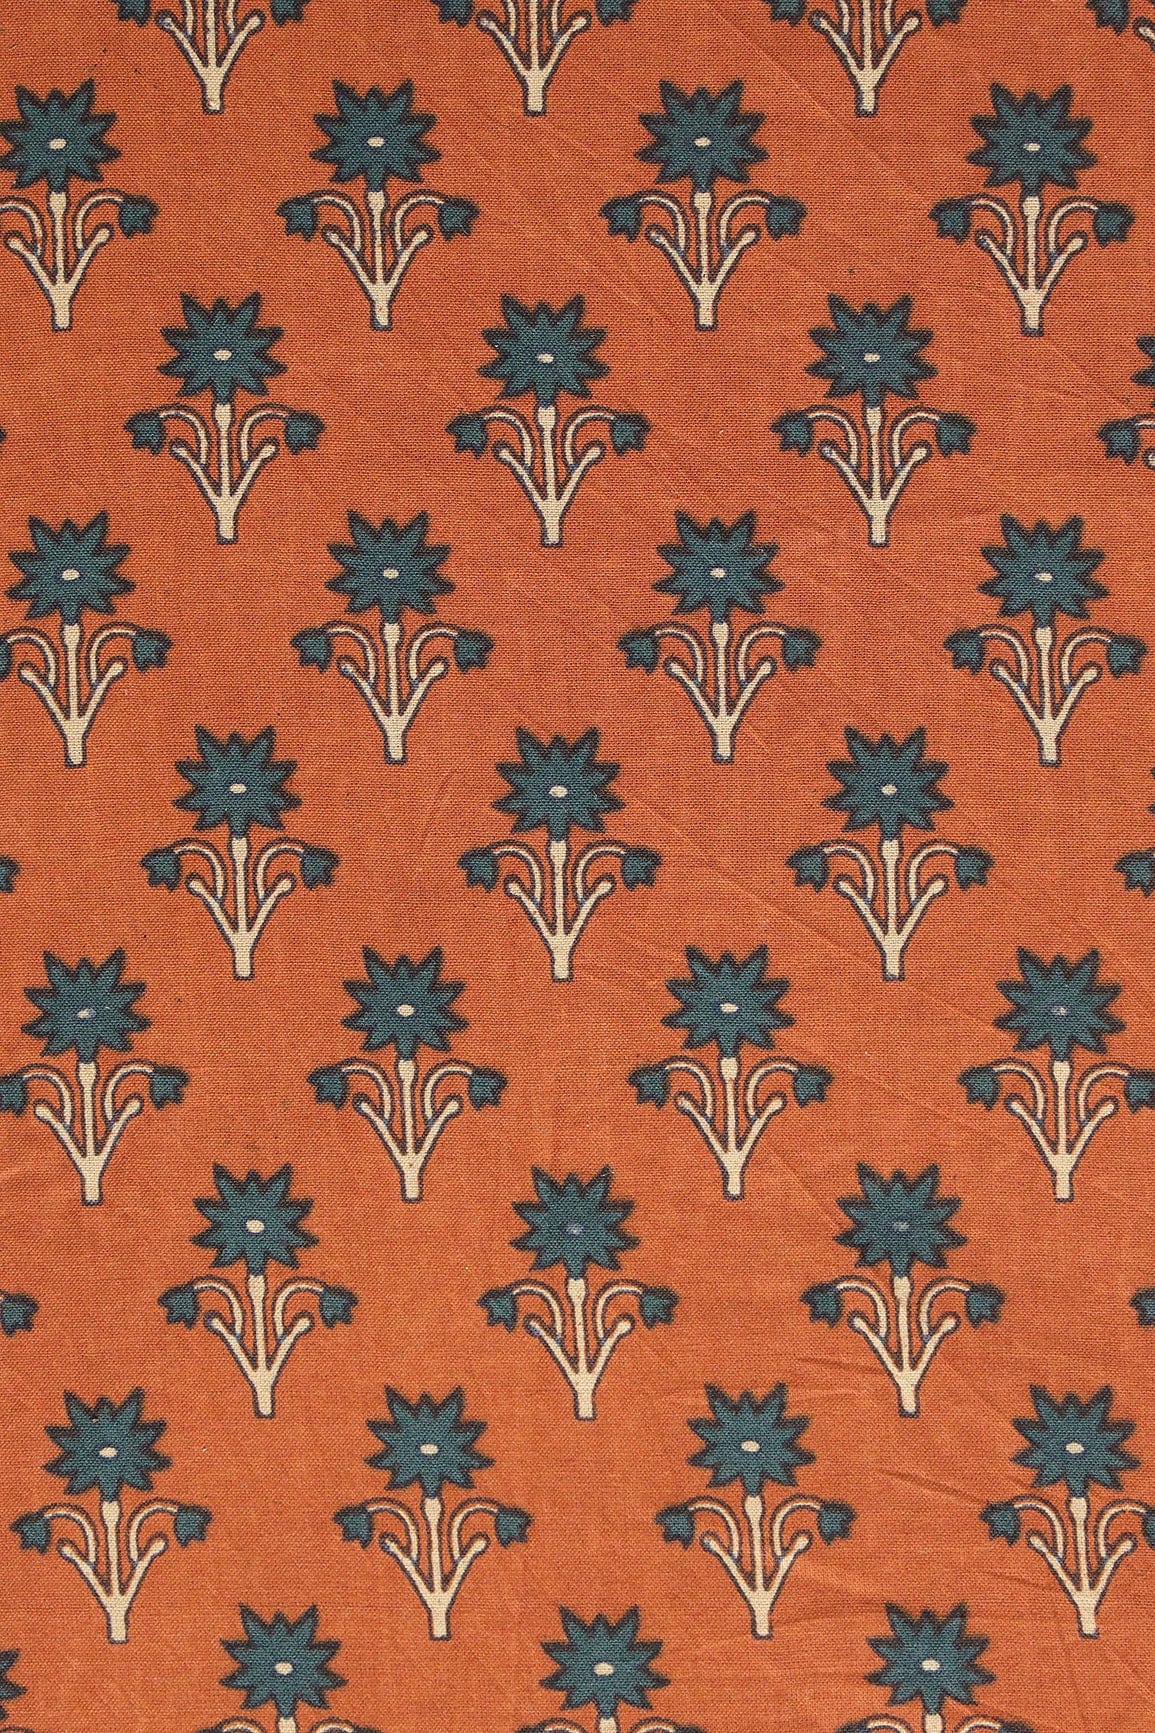 doeraa Prints Brown And Turquoise Small Floral Booti Pattern Screen Print organic Cotton Fabric